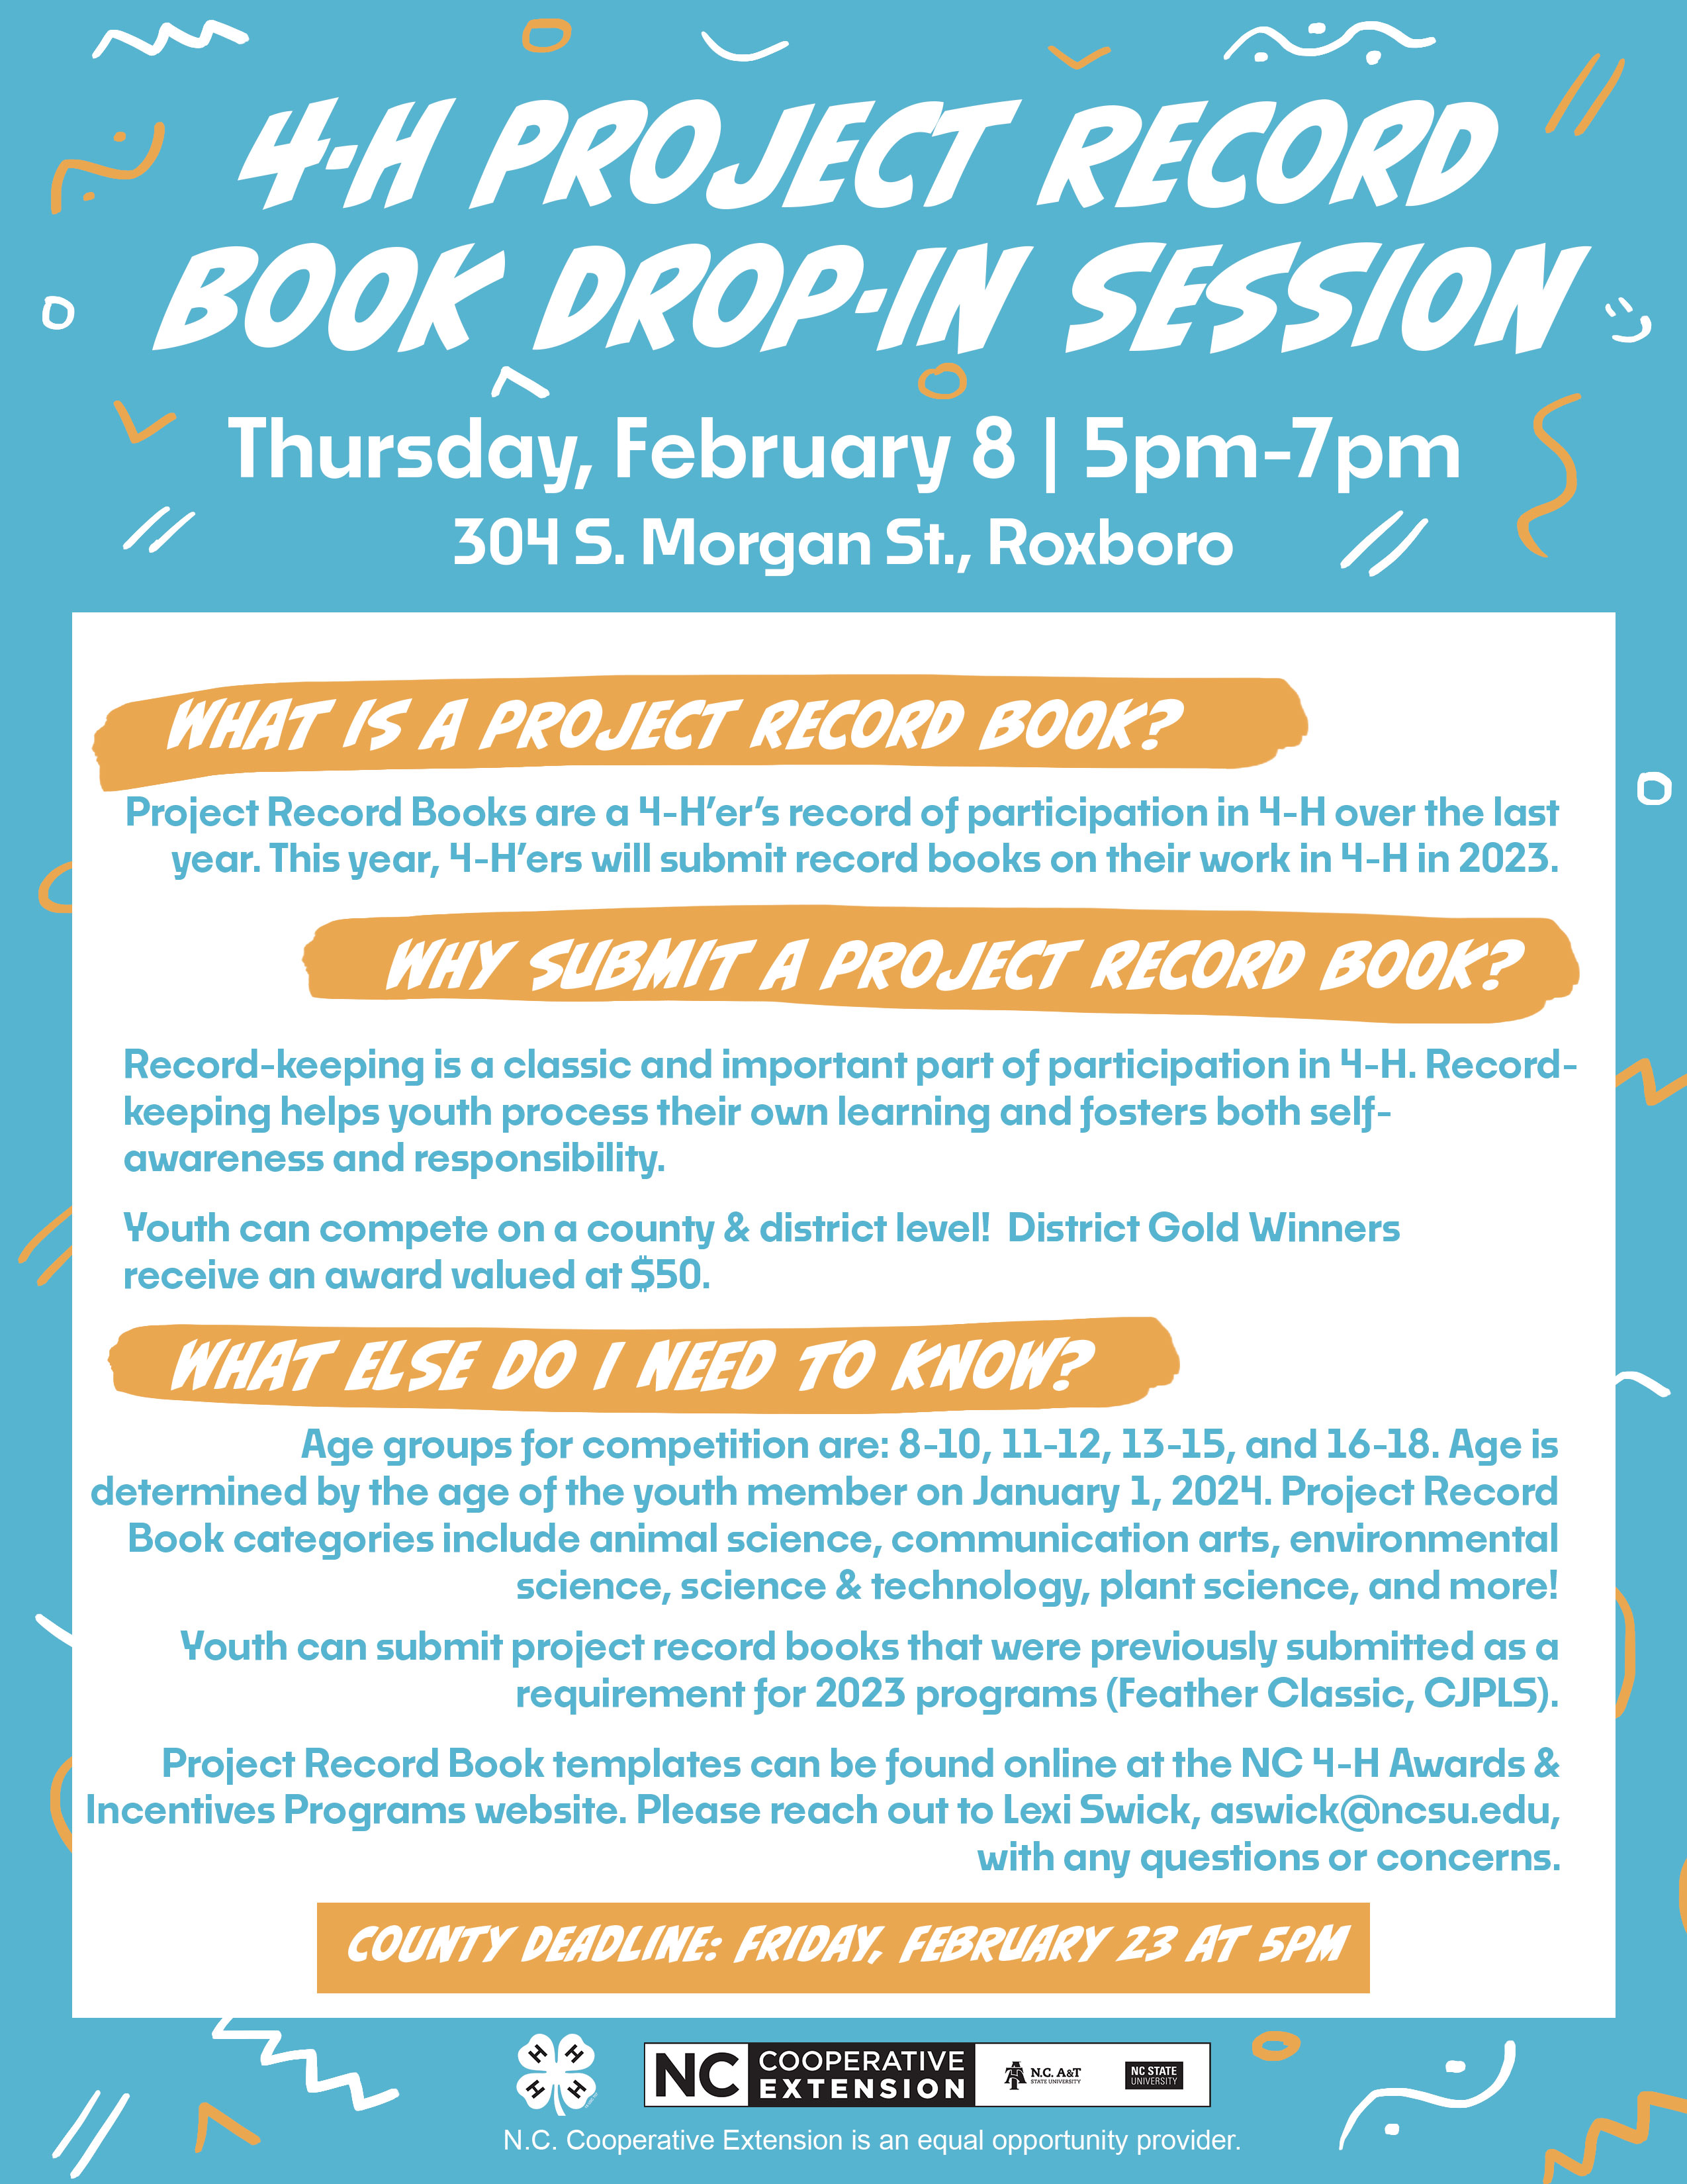 Detailed information on the Project Record Book Drop-In Session. Contact aswick@ncsu.edu for more information.